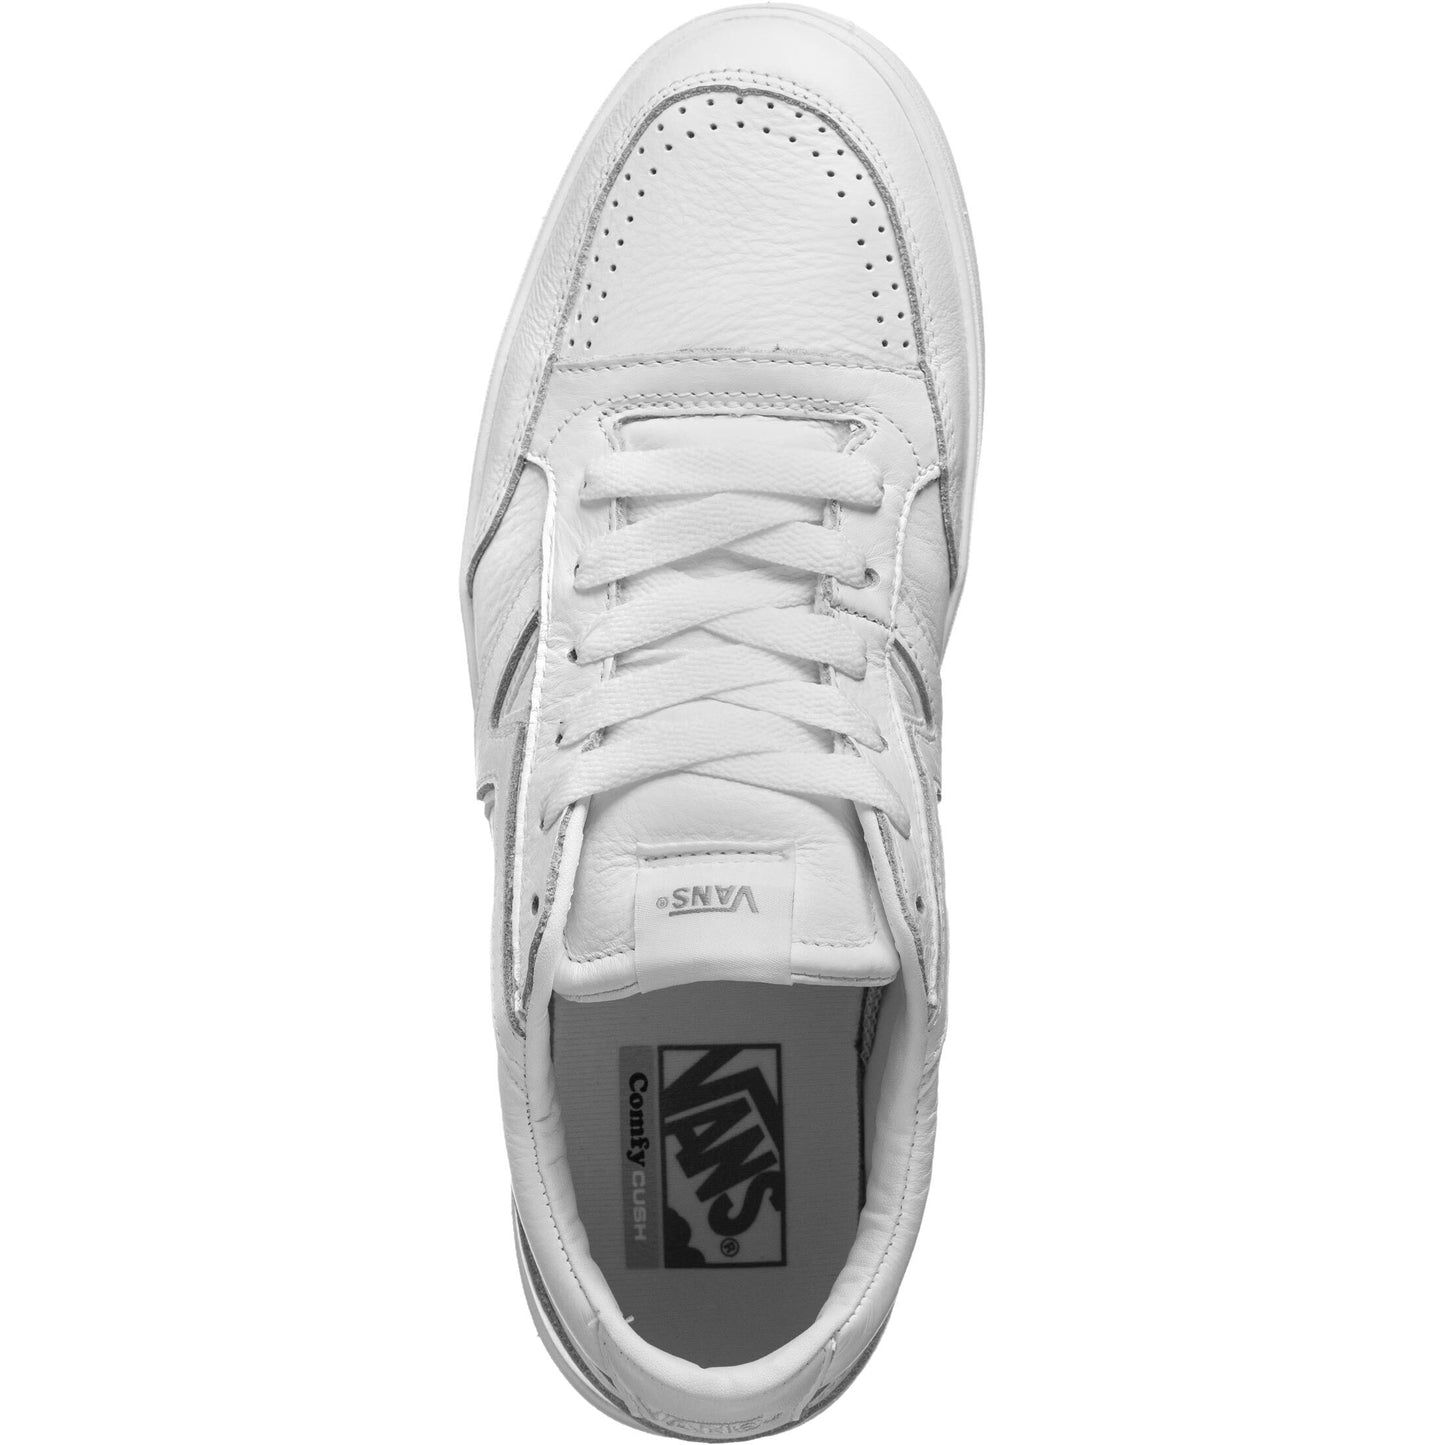 VANS LOWLAND CC LEATHER - Leather True White